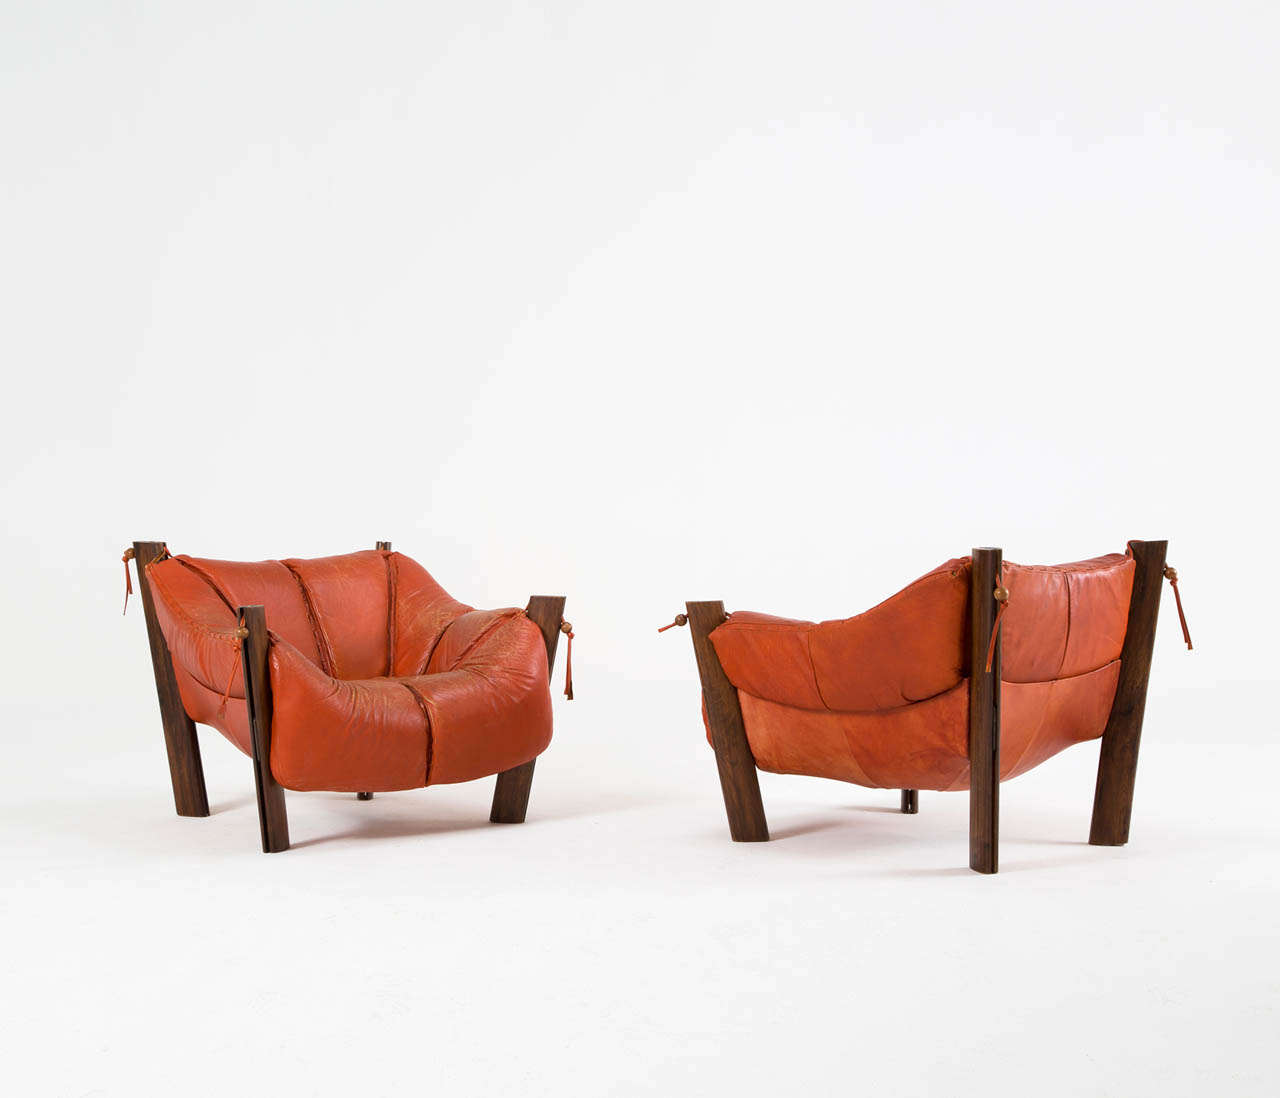 Percival Lafer Rare Pair of Brazilian Lounge Chairs in Orange Leather 1